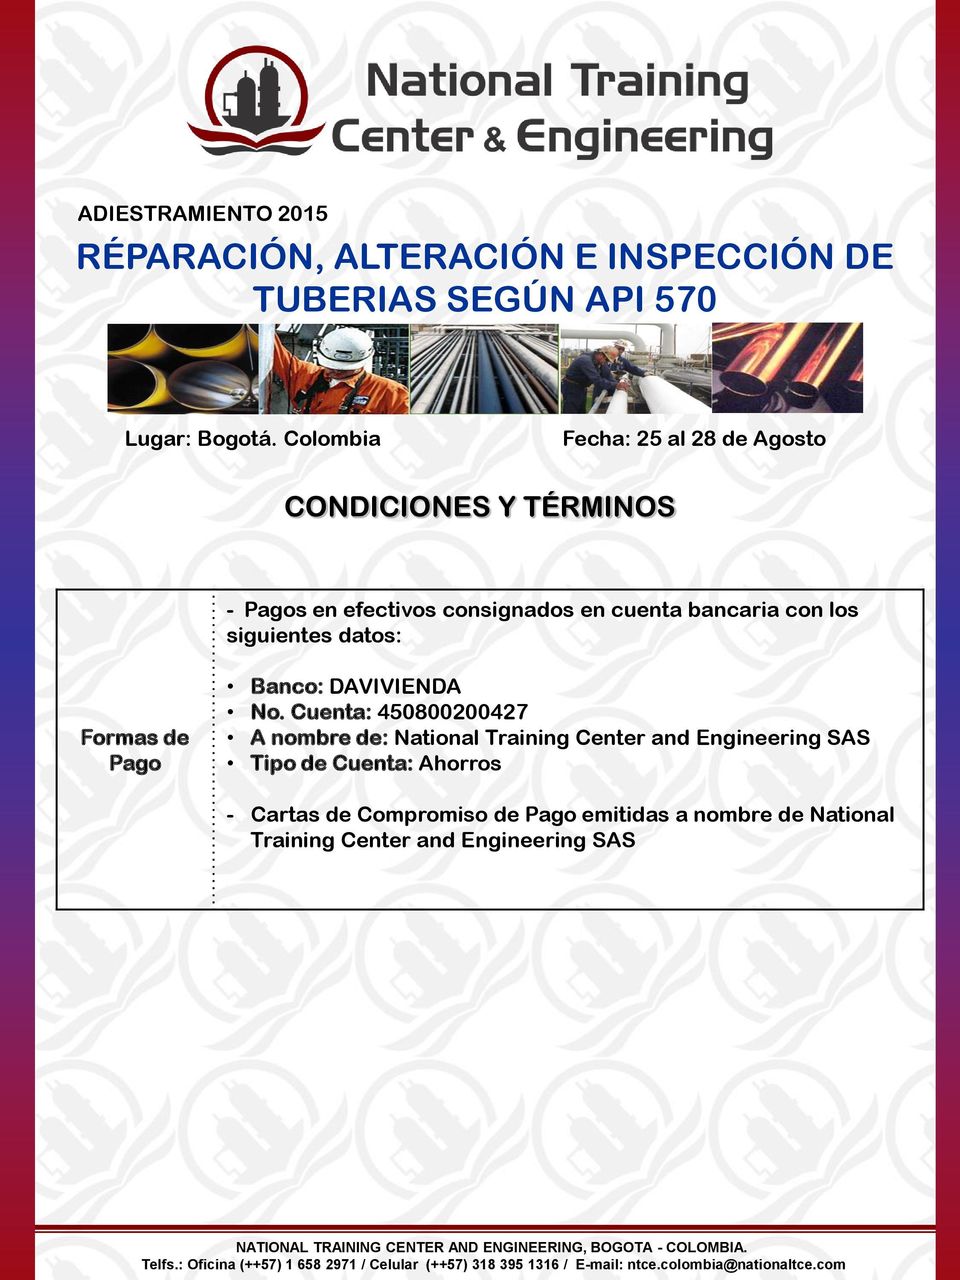 Cuenta: 450800200427 A nombre de: National Training Center and Engineering SAS Tipo